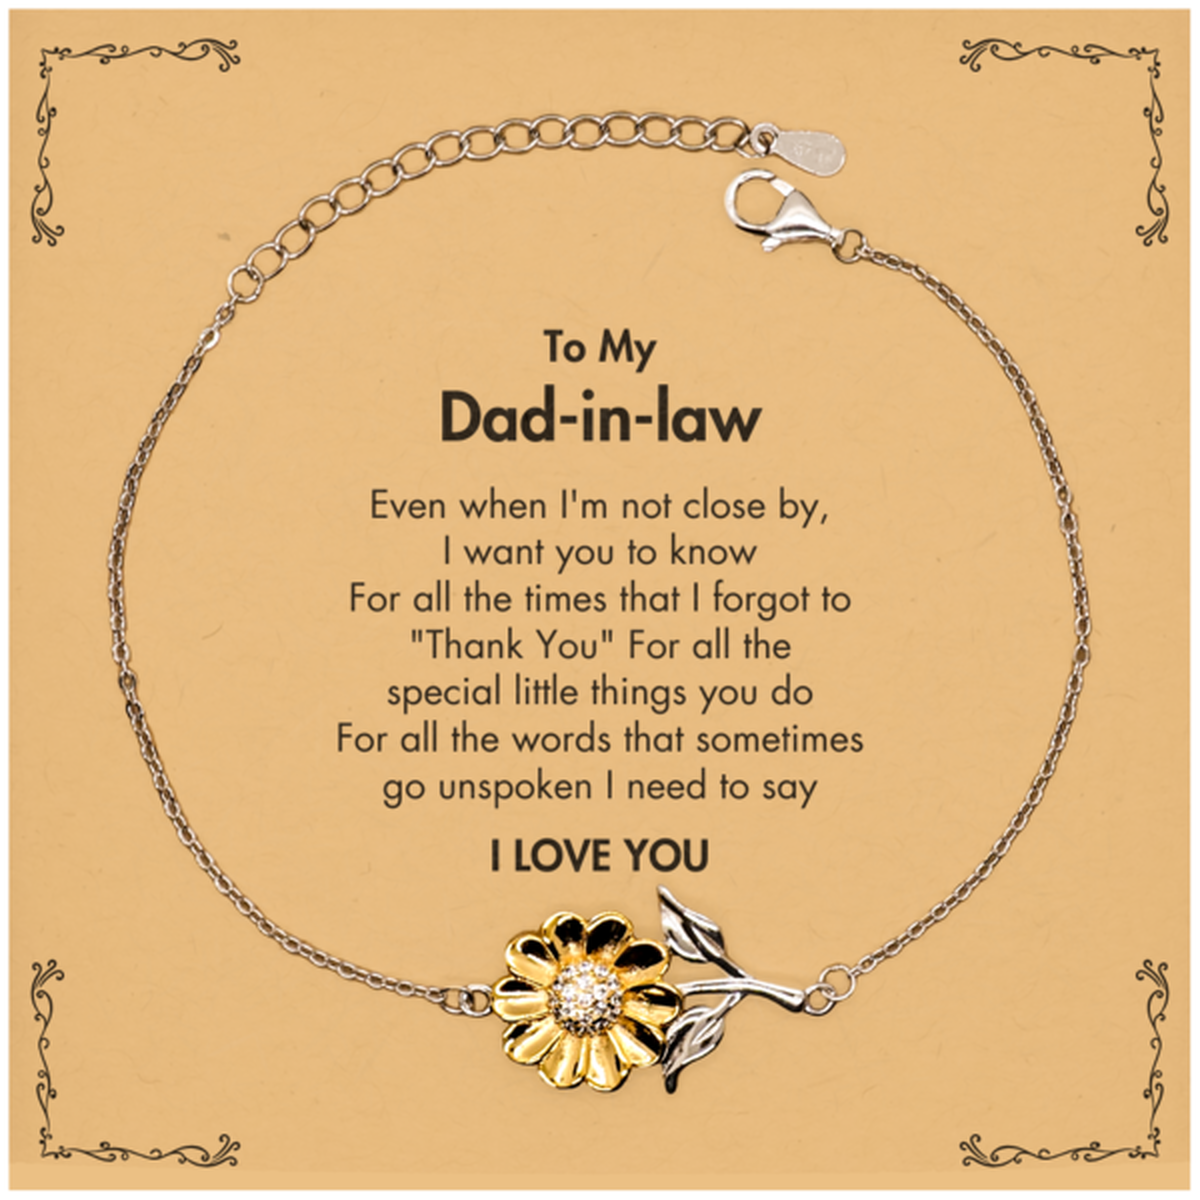 Thank You Gifts for Dad-in-law, Keepsake Sunflower Bracelet Gifts for Dad-in-law Birthday Mother's day Father's Day Dad-in-law For all the words That sometimes go unspoken I need to say I LOVE YOU